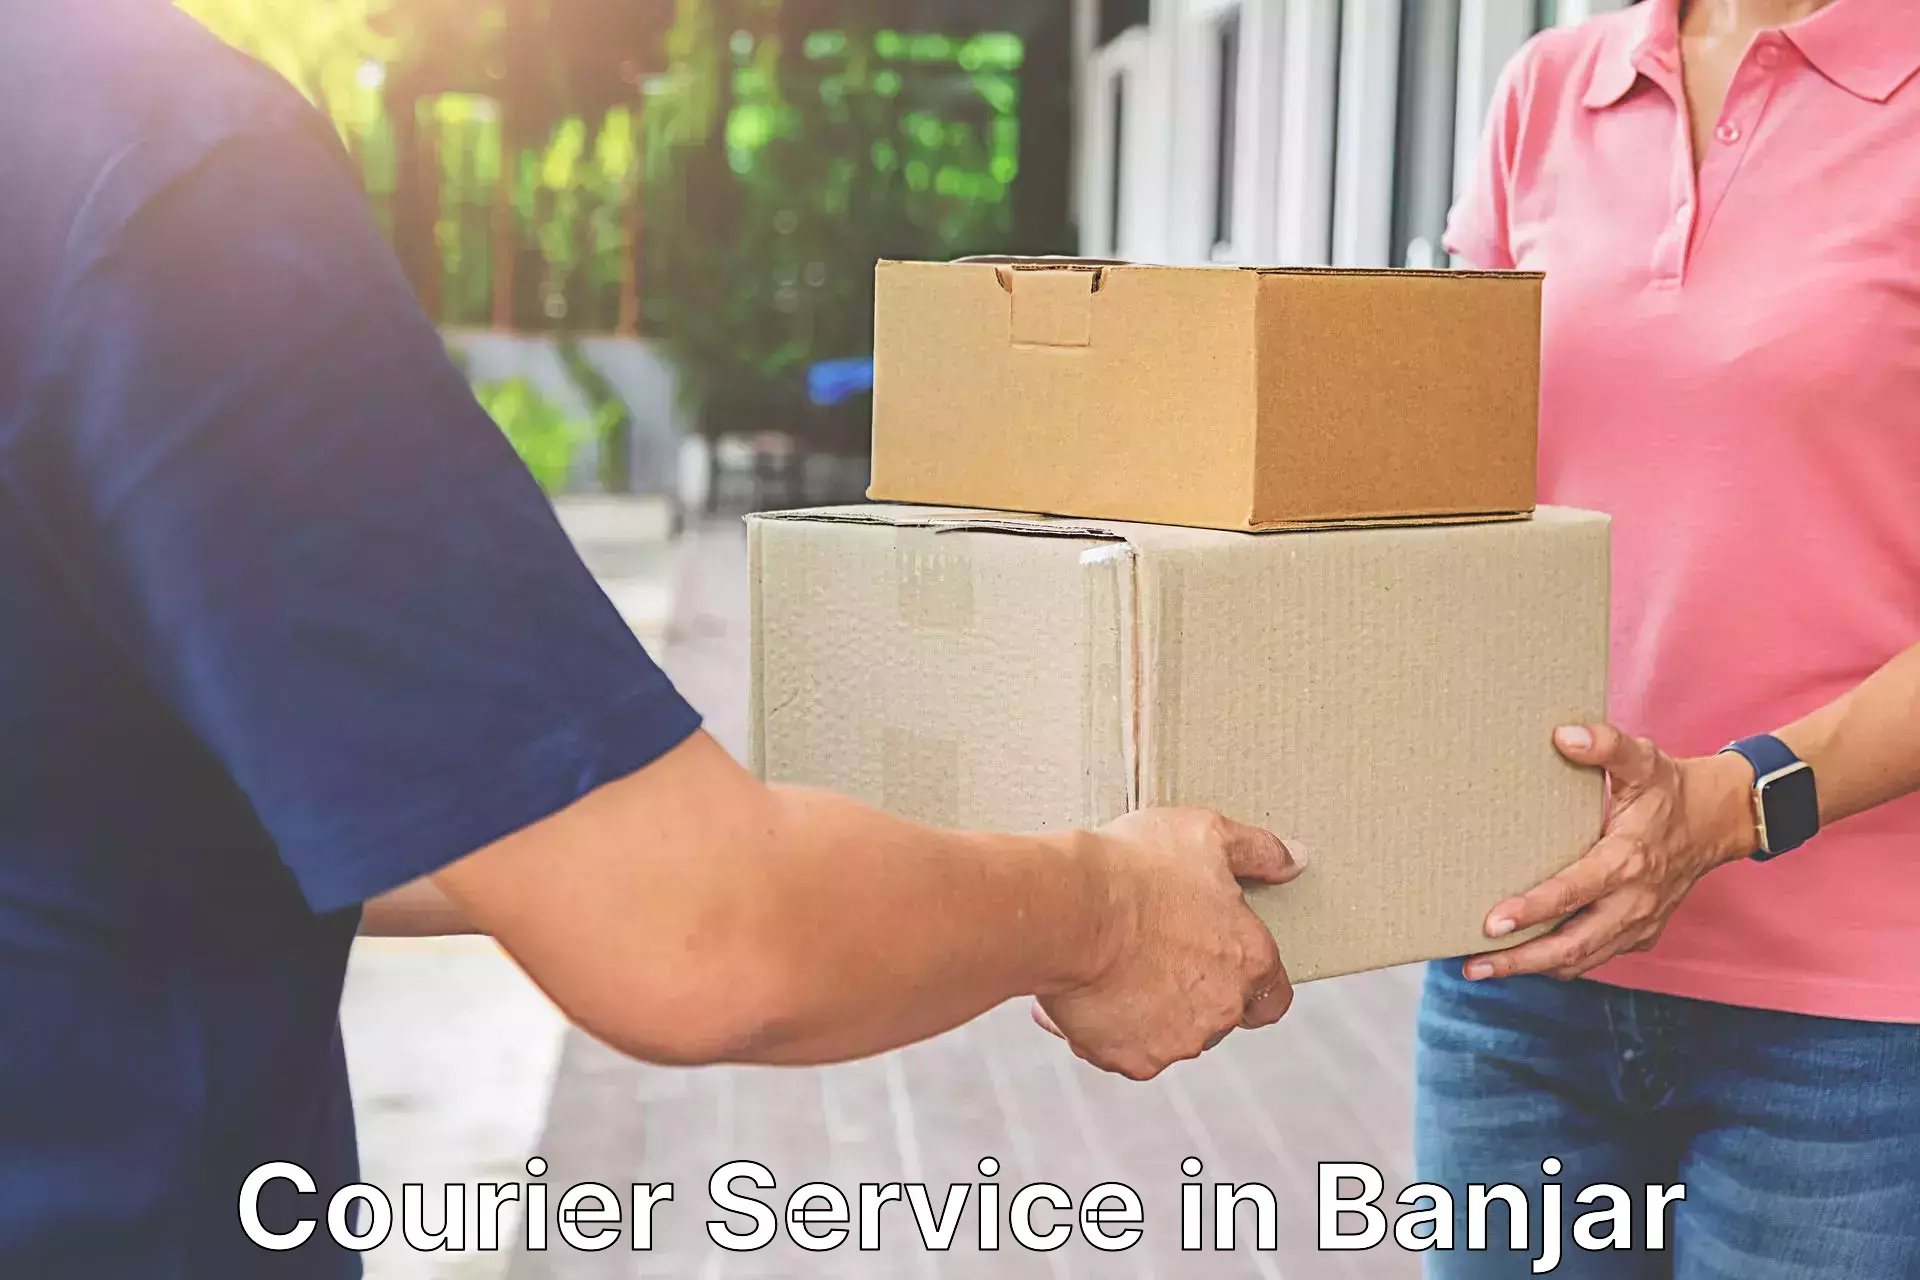 Quality courier services in Banjar